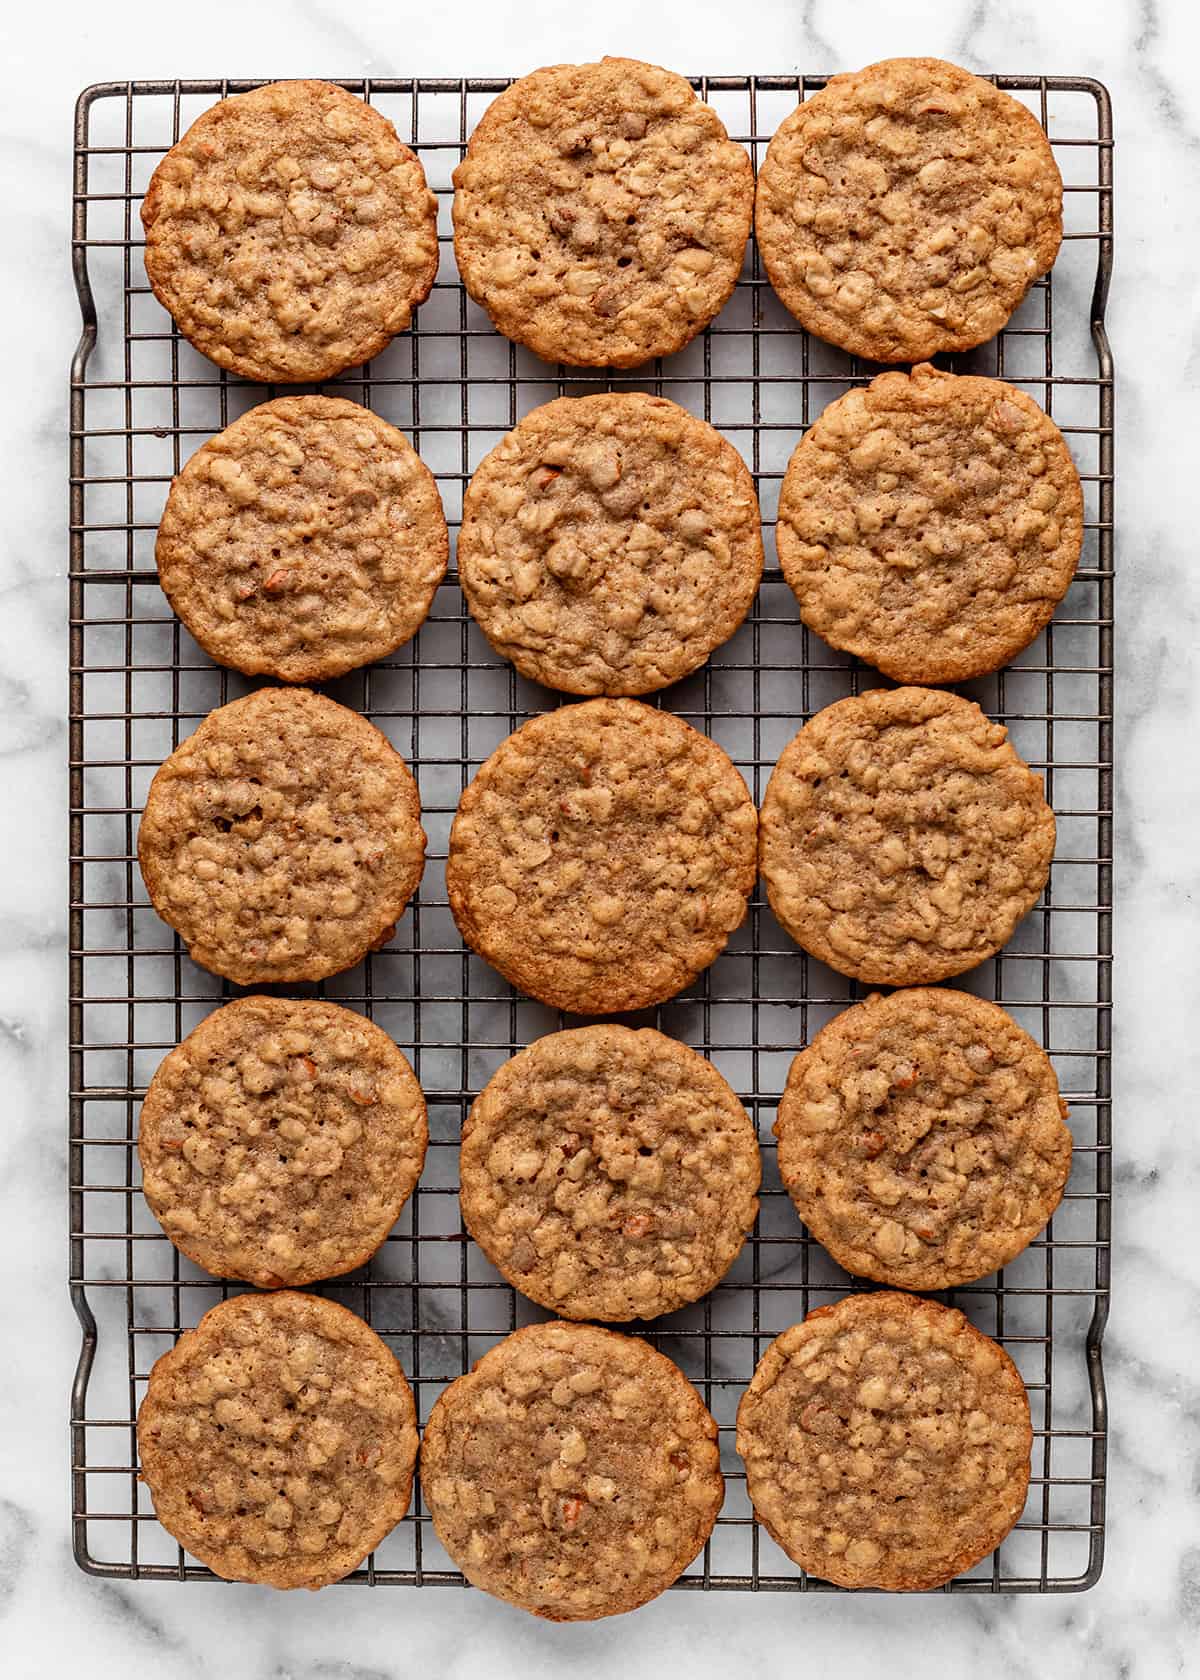 Homemade Oatmeal Cream Pie cookies on a wire cooling rack